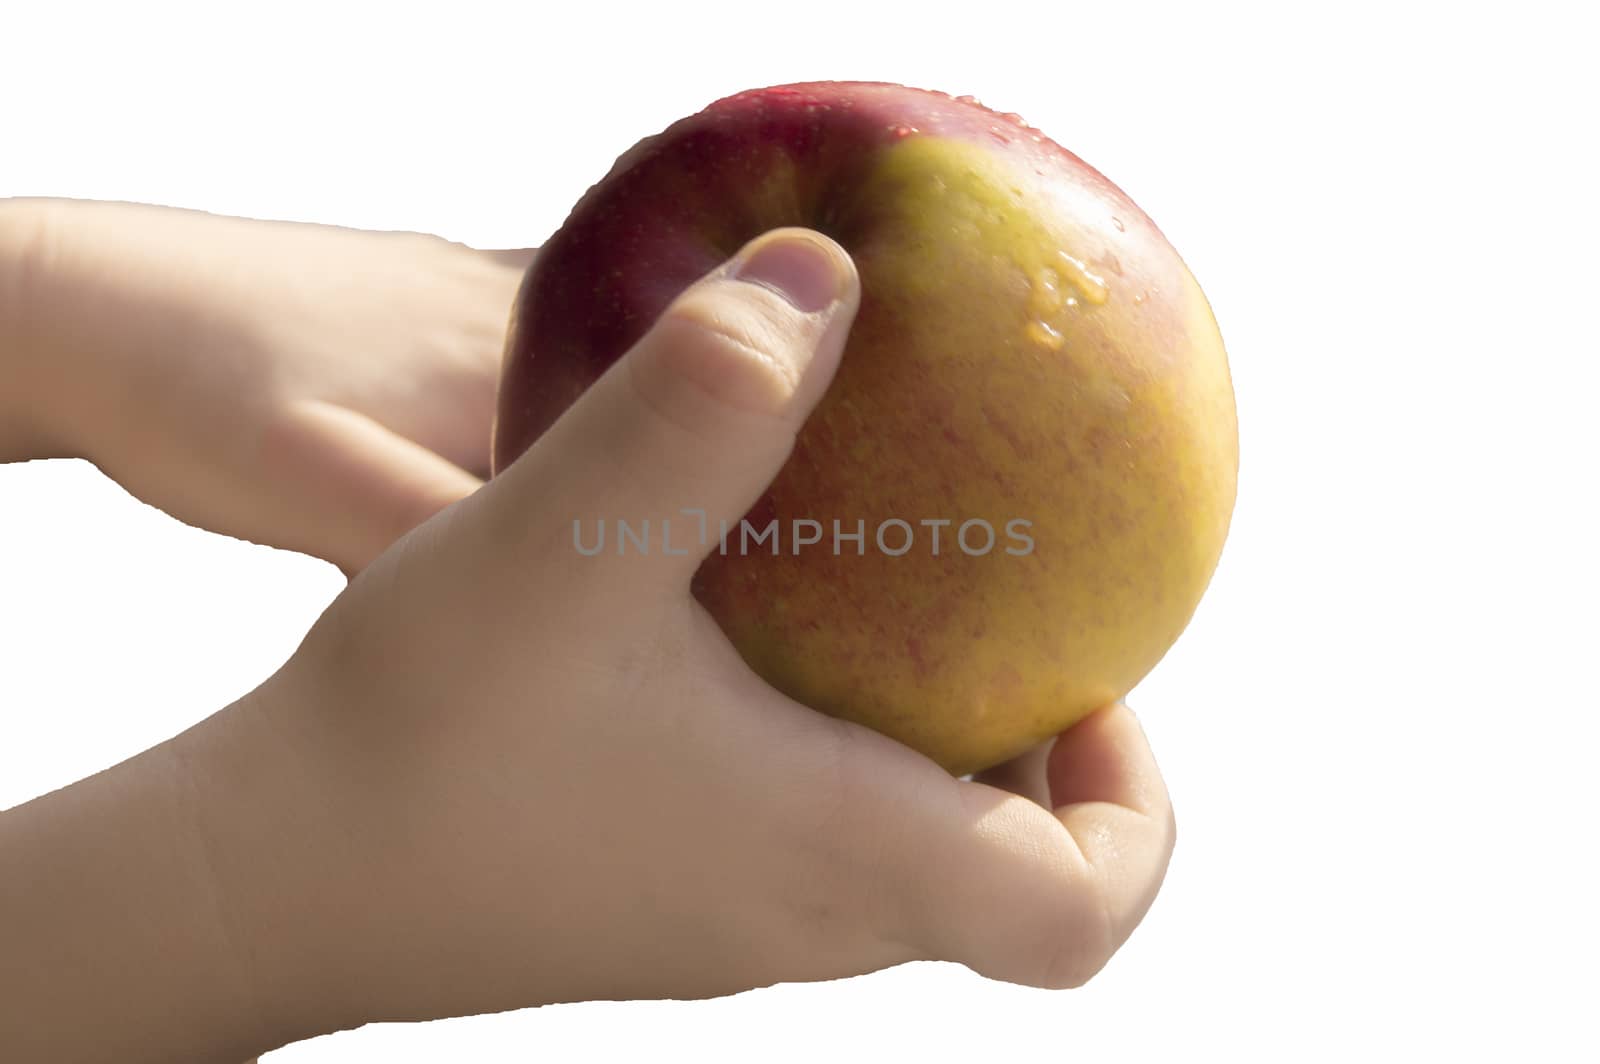 Clipping, baby holding a ripe Apple, close-up, sunlight, healthy food concept for kids by claire_lucia